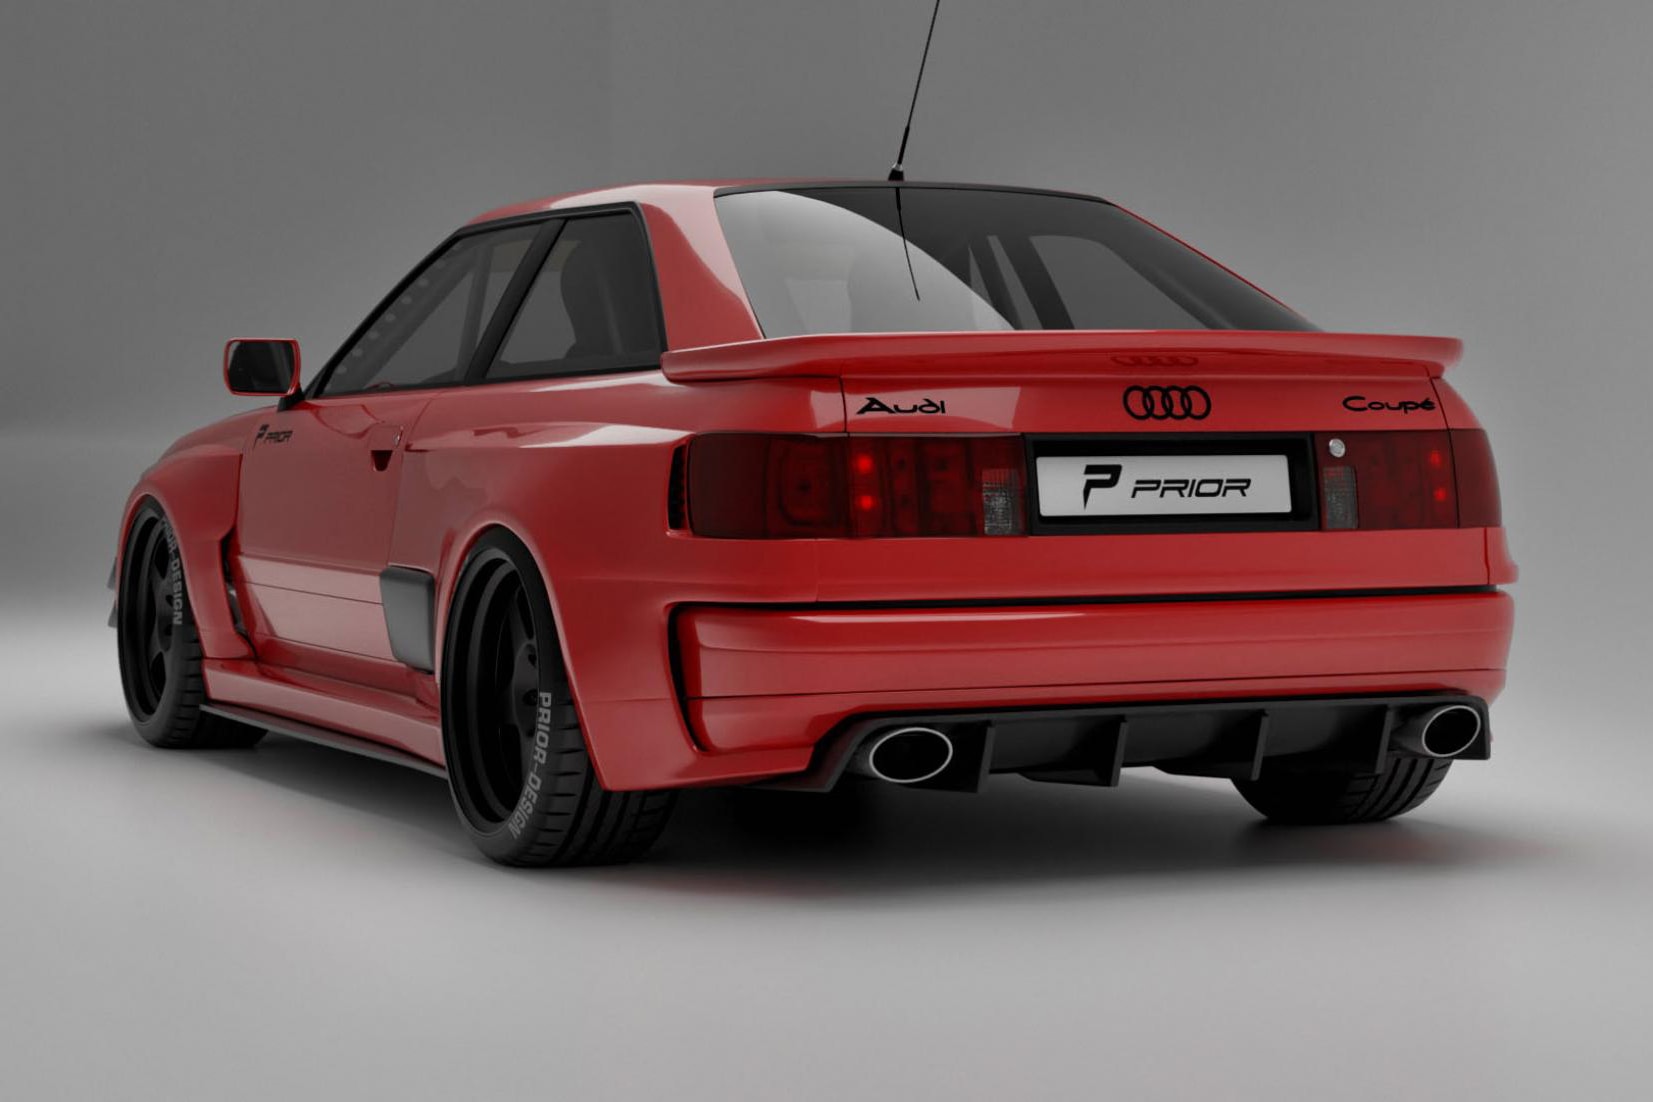 Prior Design Audi Coupé B3 1988 German Automotive Performance Car Rally Cars Tuning Wide Bodykit Custom Limited Edition Motorsports 